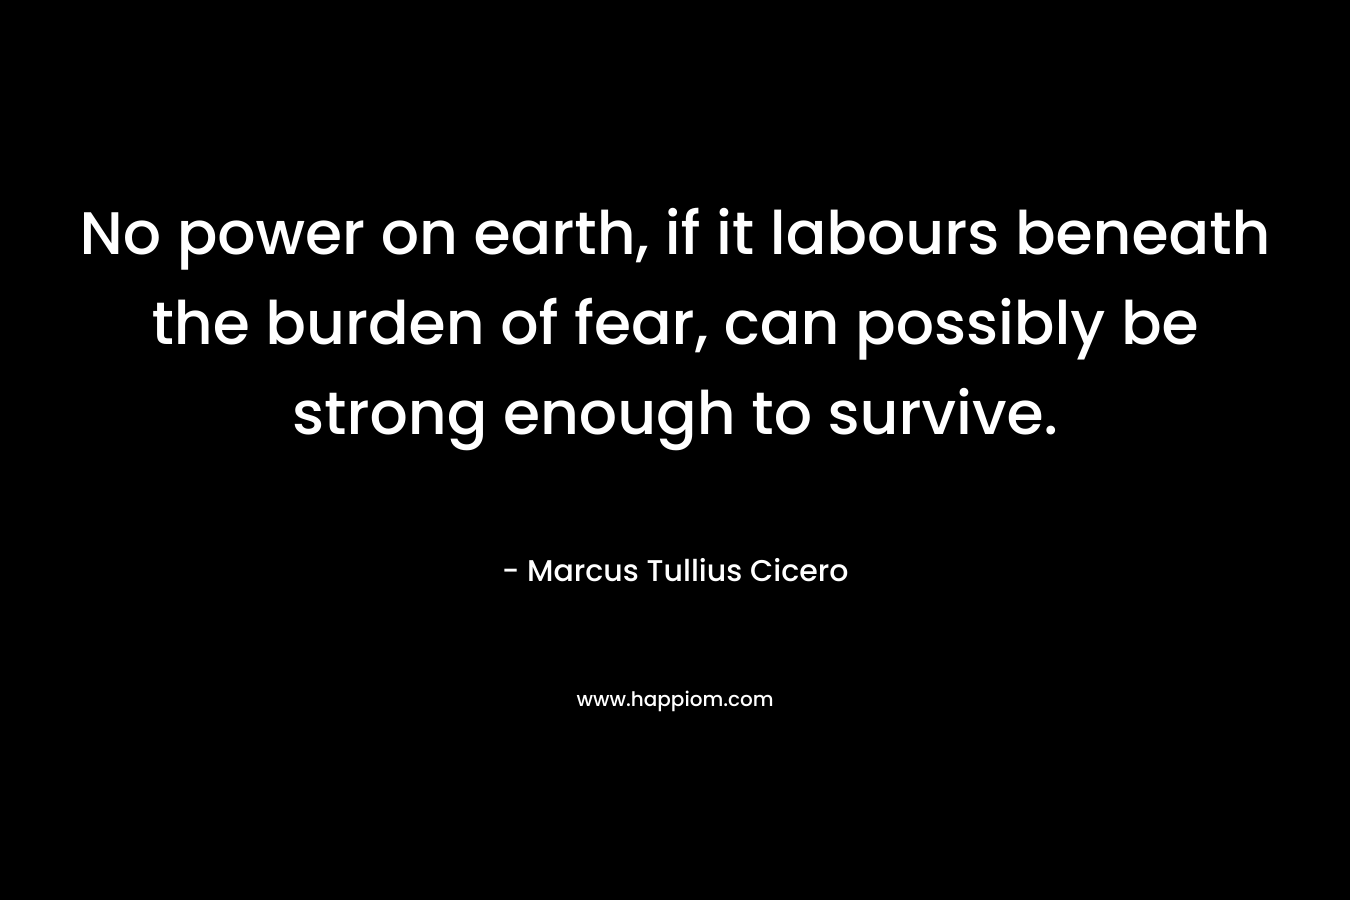 No power on earth, if it labours beneath the burden of fear, can possibly be strong enough to survive. – Marcus Tullius Cicero